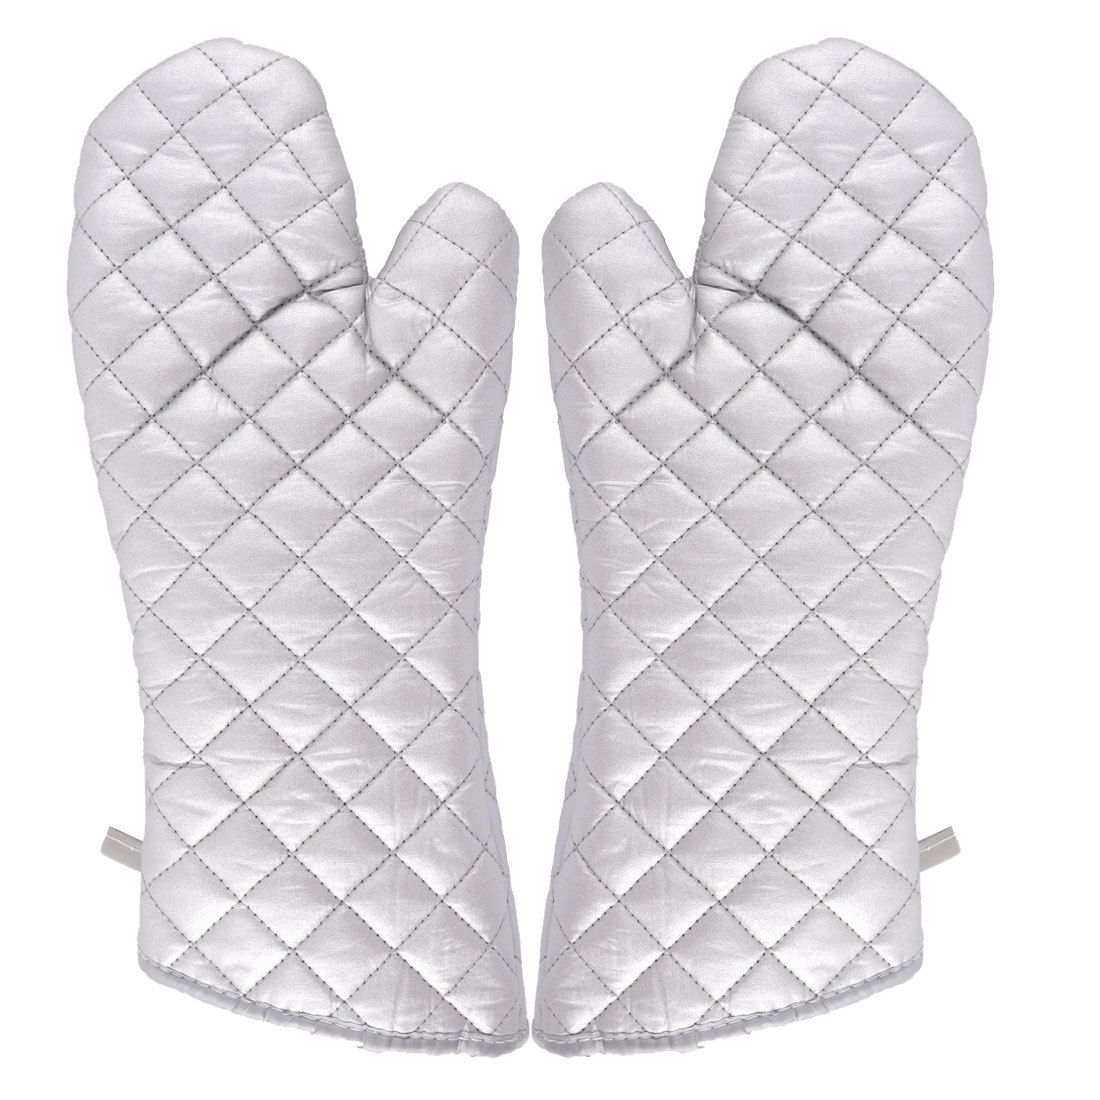 2Pcs Microfiber Wash Mitt Blend Dusting Gloves for House Cleaning